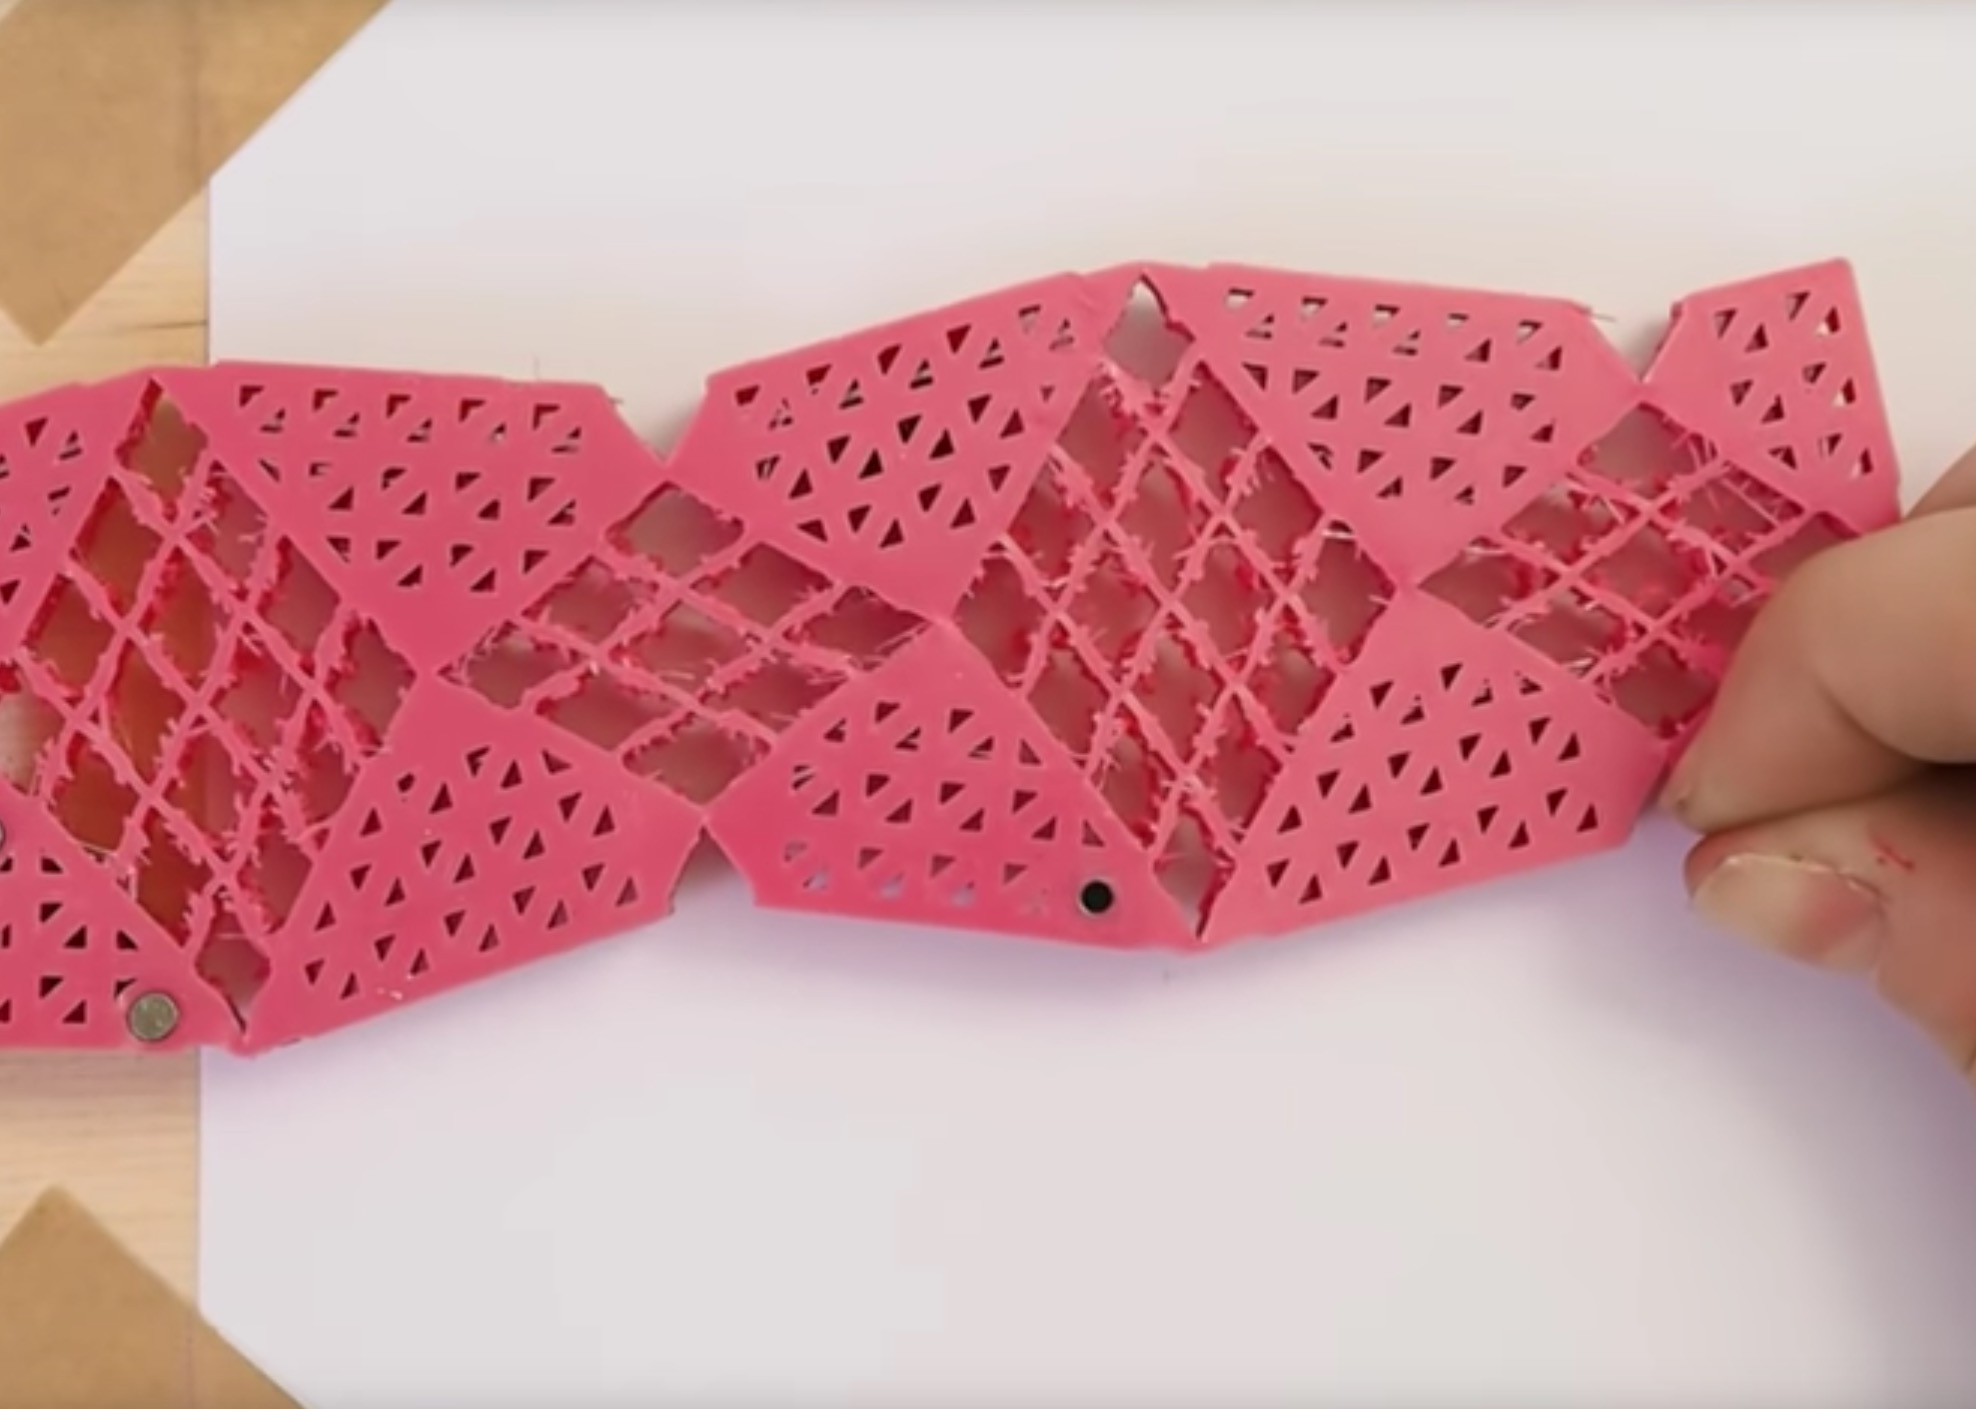  Designing mechanical objects with 3D printed meta-materials 